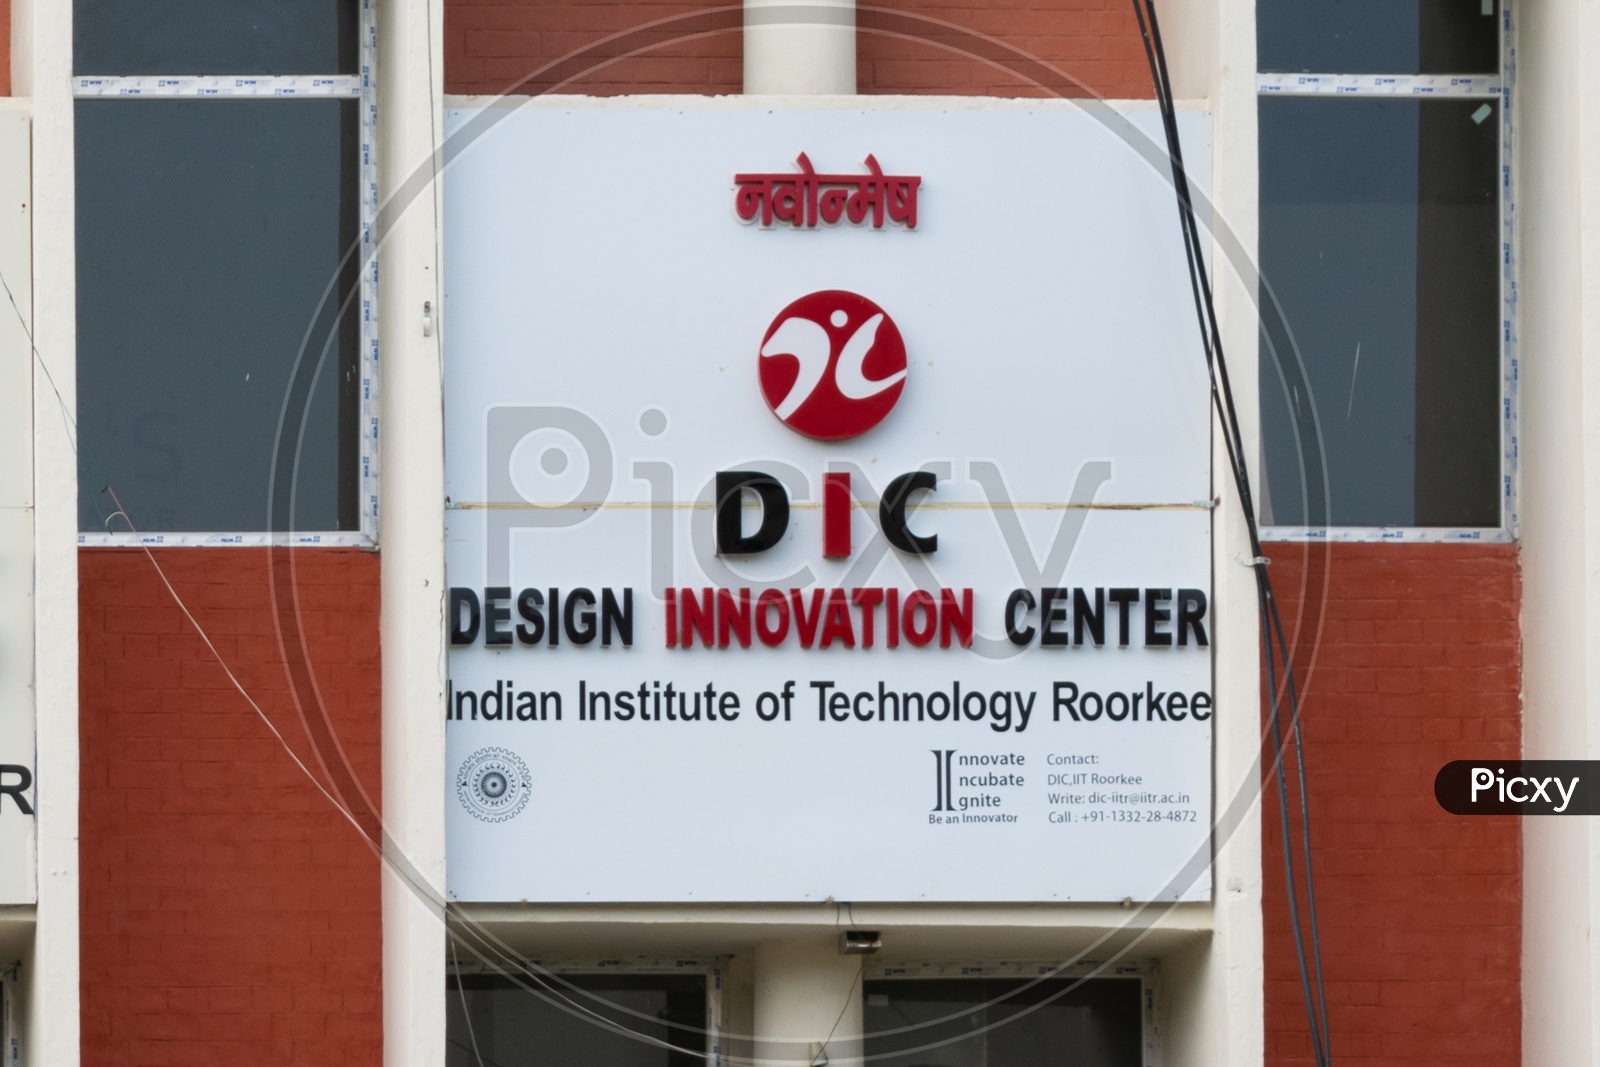 Design Innovation Center (DIC), Mandi Cell(Hafiz Mohammad Ibrahim Building), Indian Institute of Technology Roorkee (IIT Roorkee)